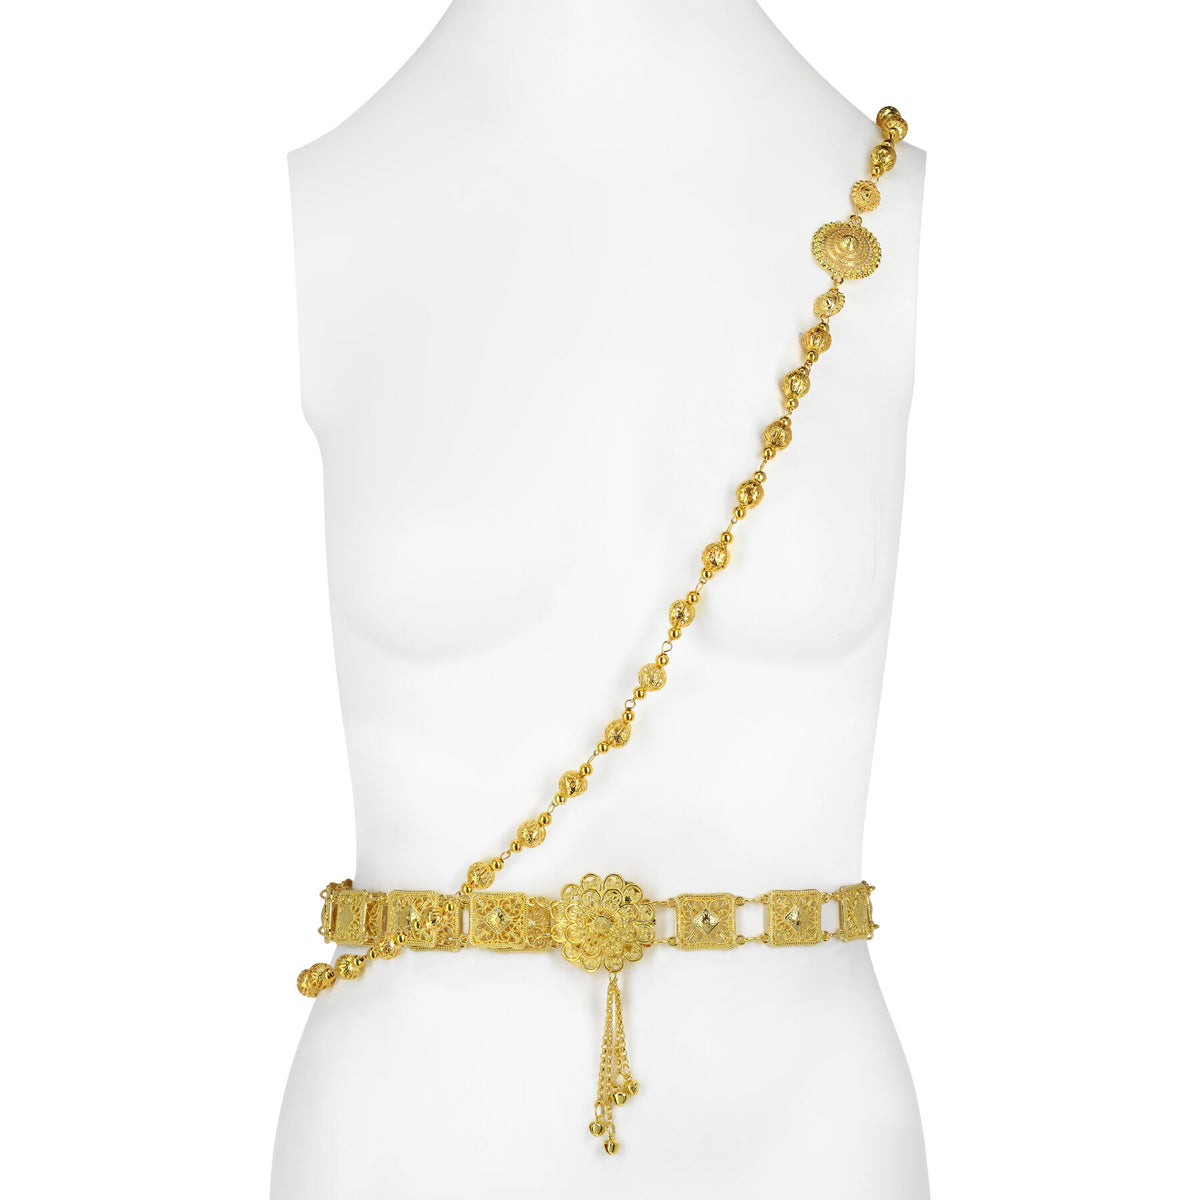 A classic gold belt and body chain jewelry set to pull together your ensemble.